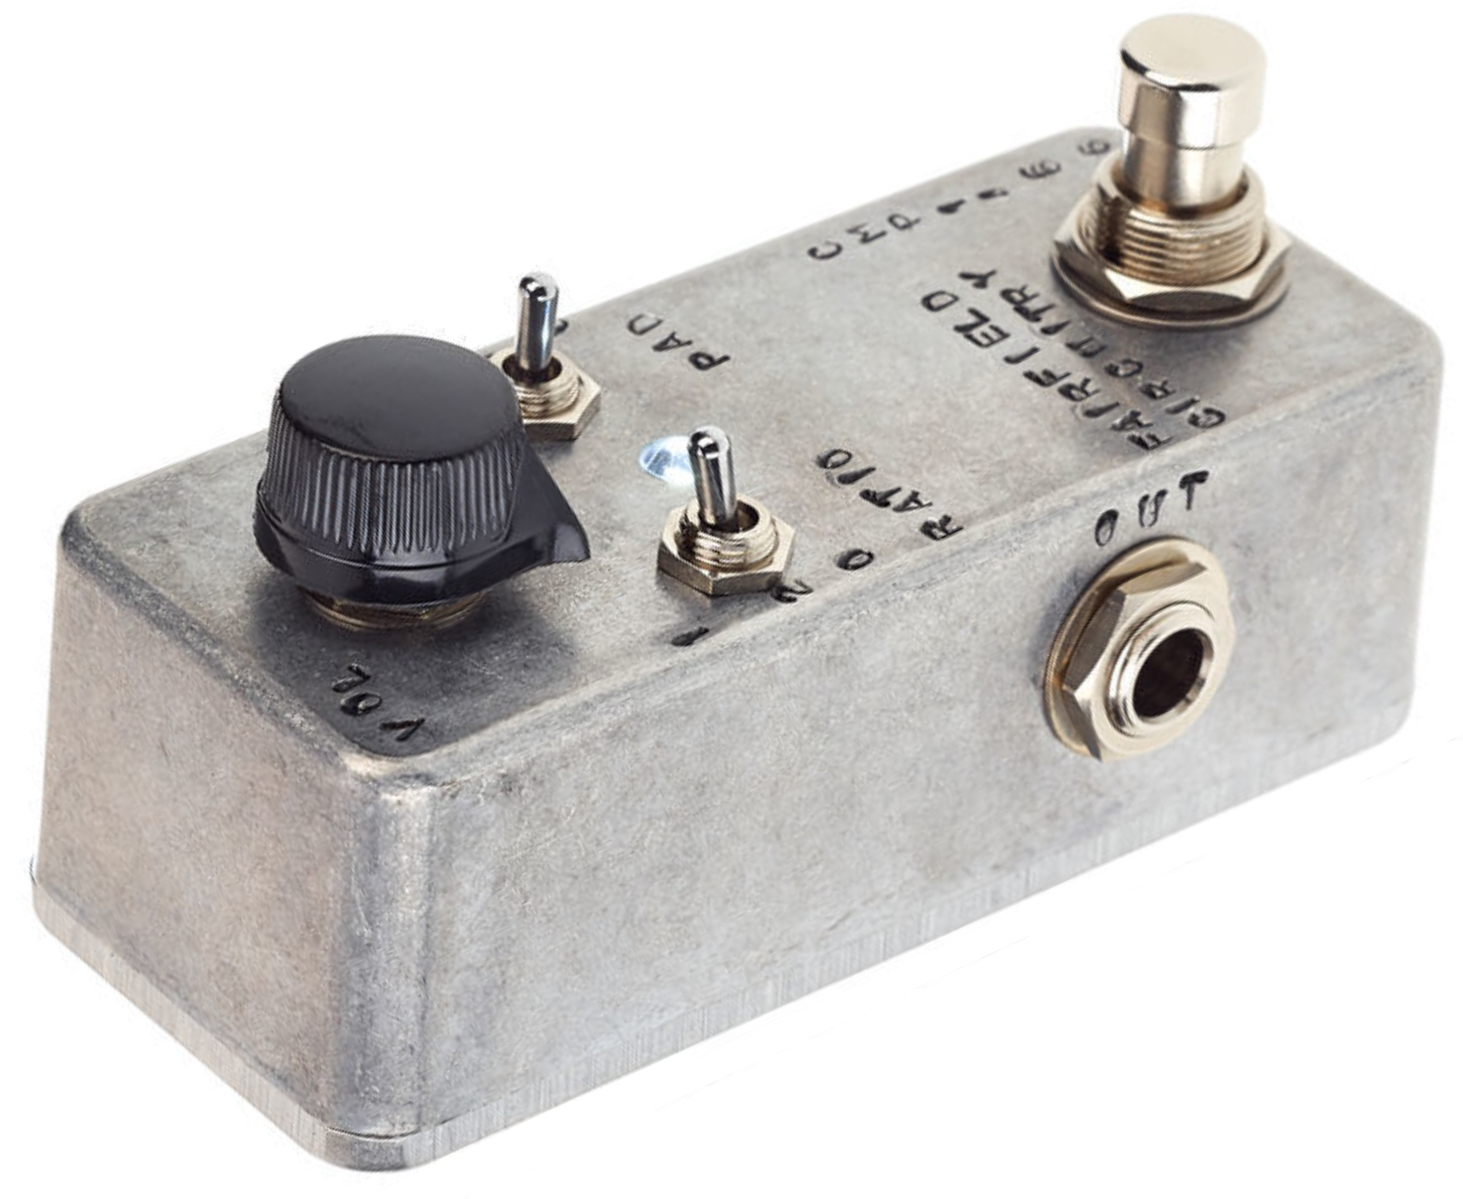 Fairfield Circuitry The Accountant Compressor - Compressor/sustain/noise gate effect pedaal - Variation 2